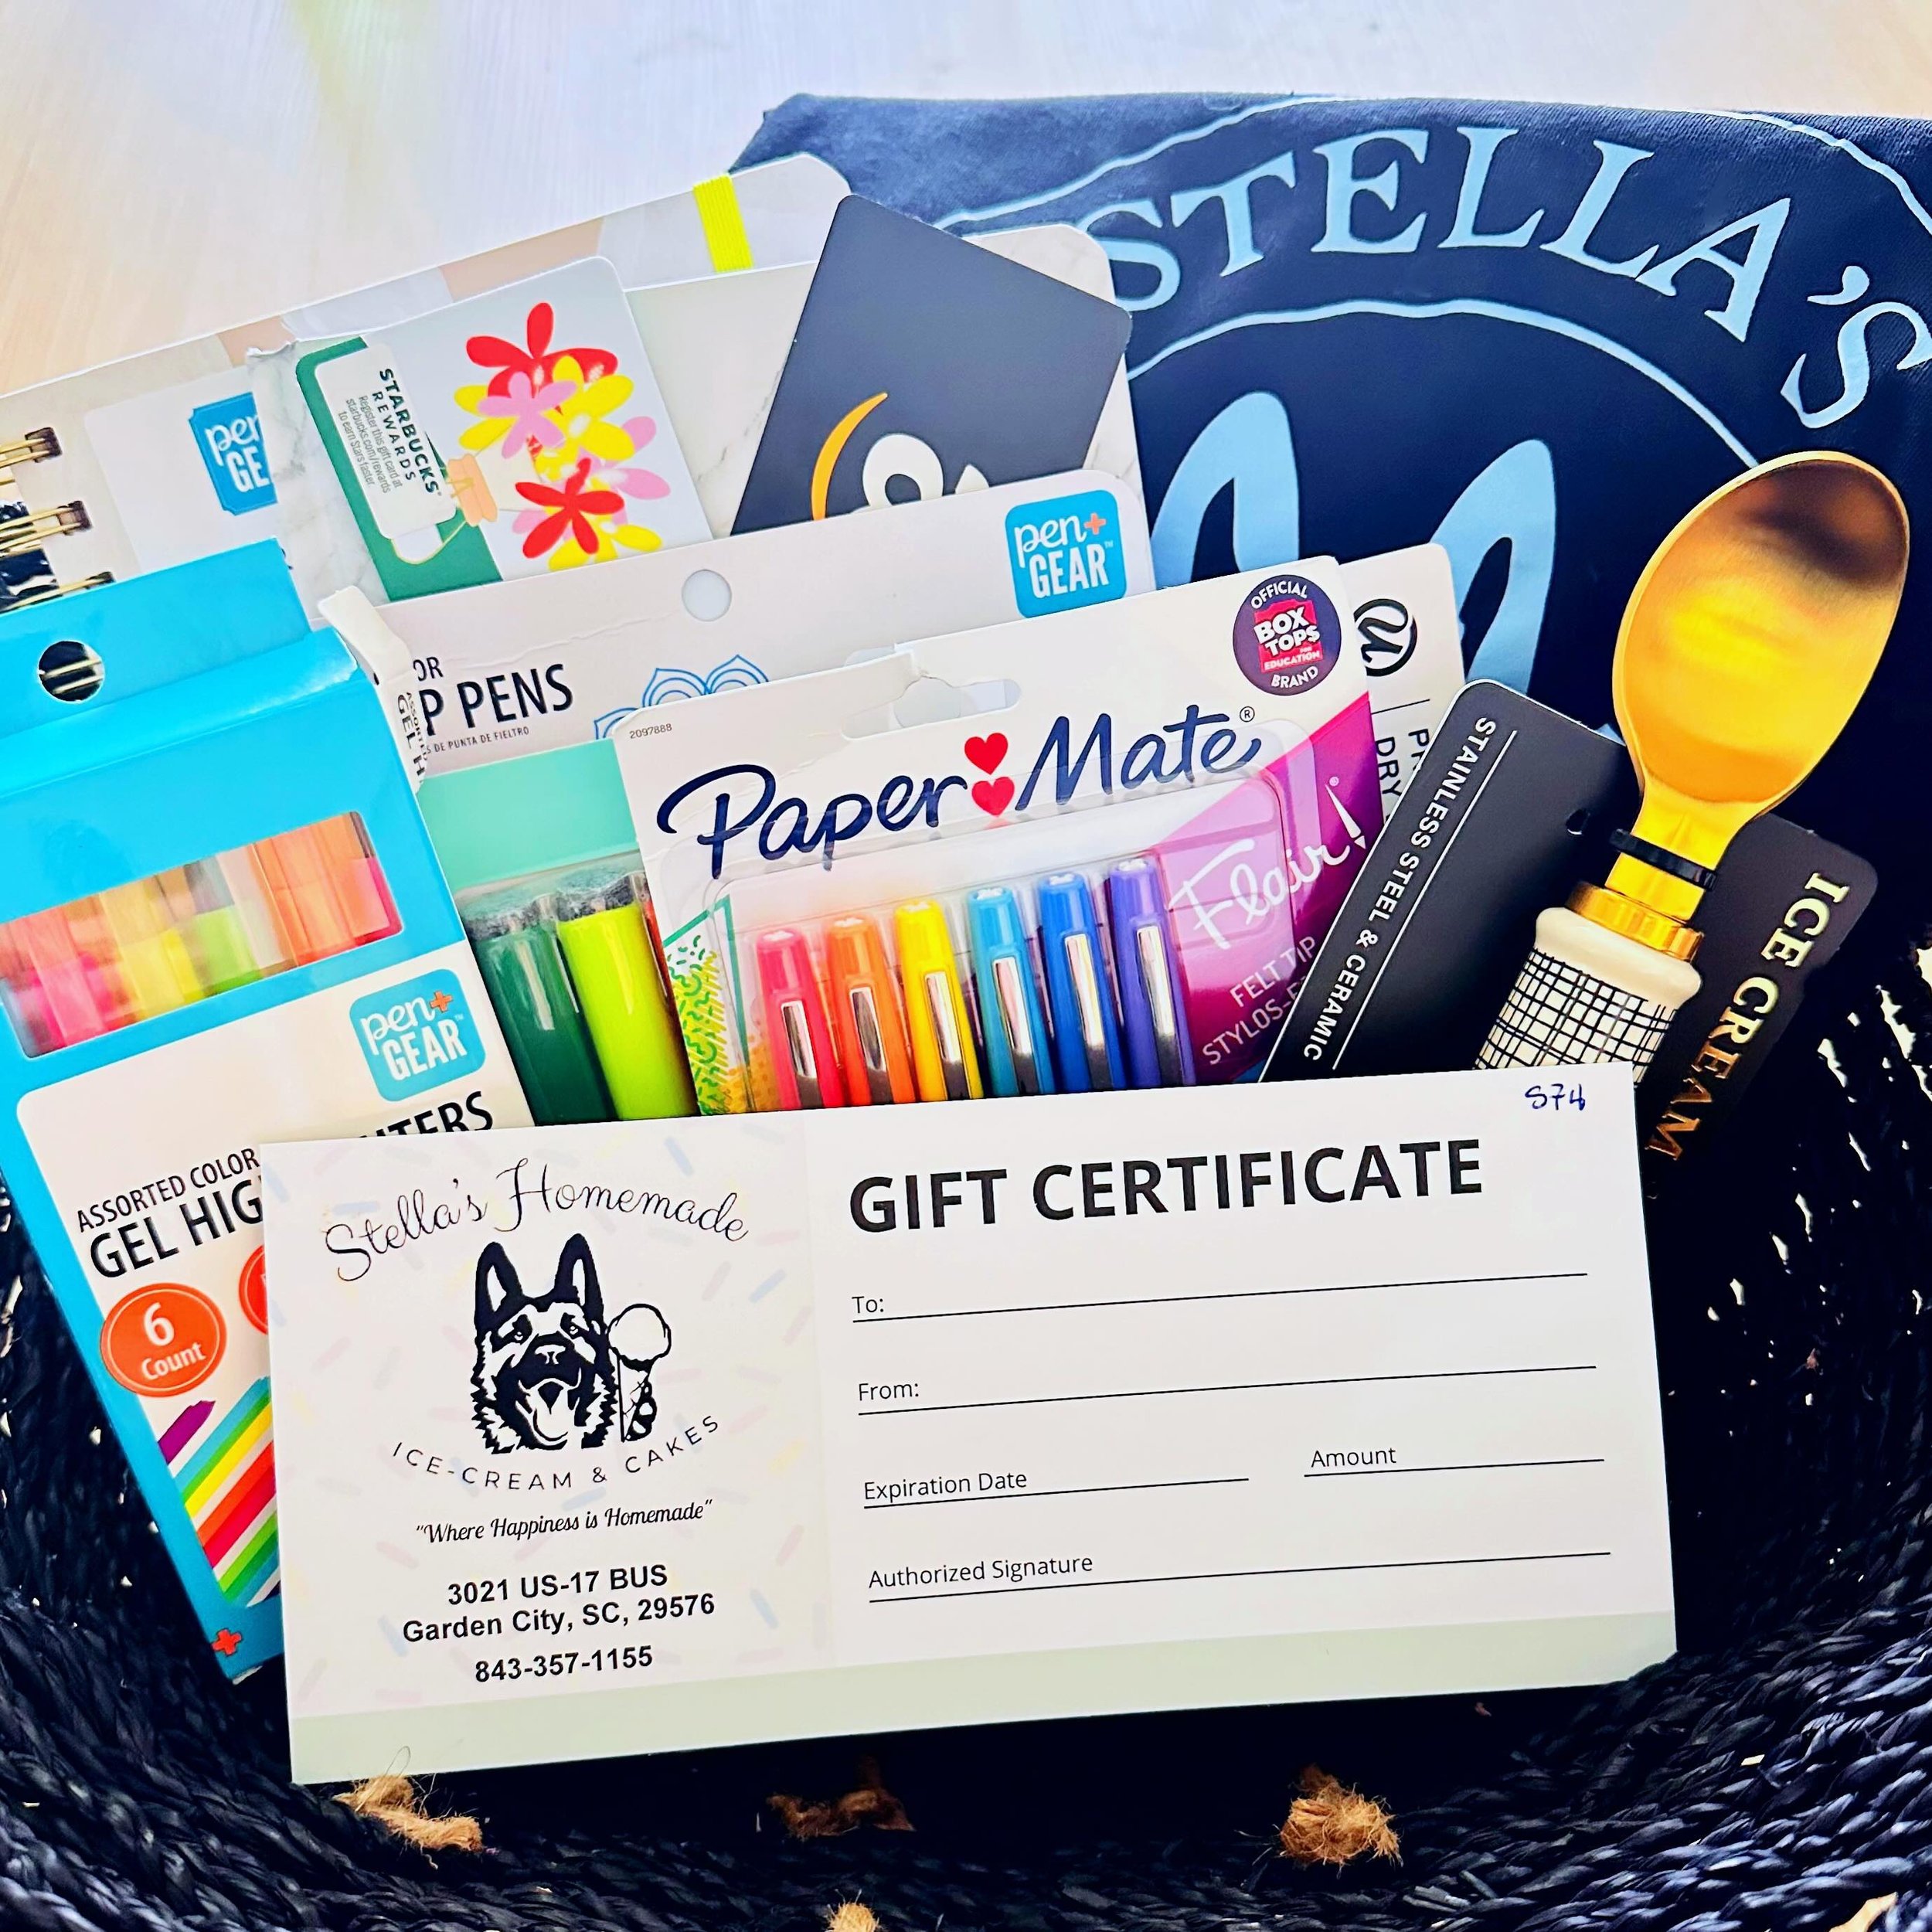 ‼️ It&rsquo;s TEACHER APPRECIATION WEEK 👩&zwj;🏫 let&rsquo;s show our local teachers some love with a GIVEAWAY!! We have a teacher basket to giveaway with a Stella&rsquo;s t-shirt and gift certificate, school supplies, an Amazon gift card, Starbucks